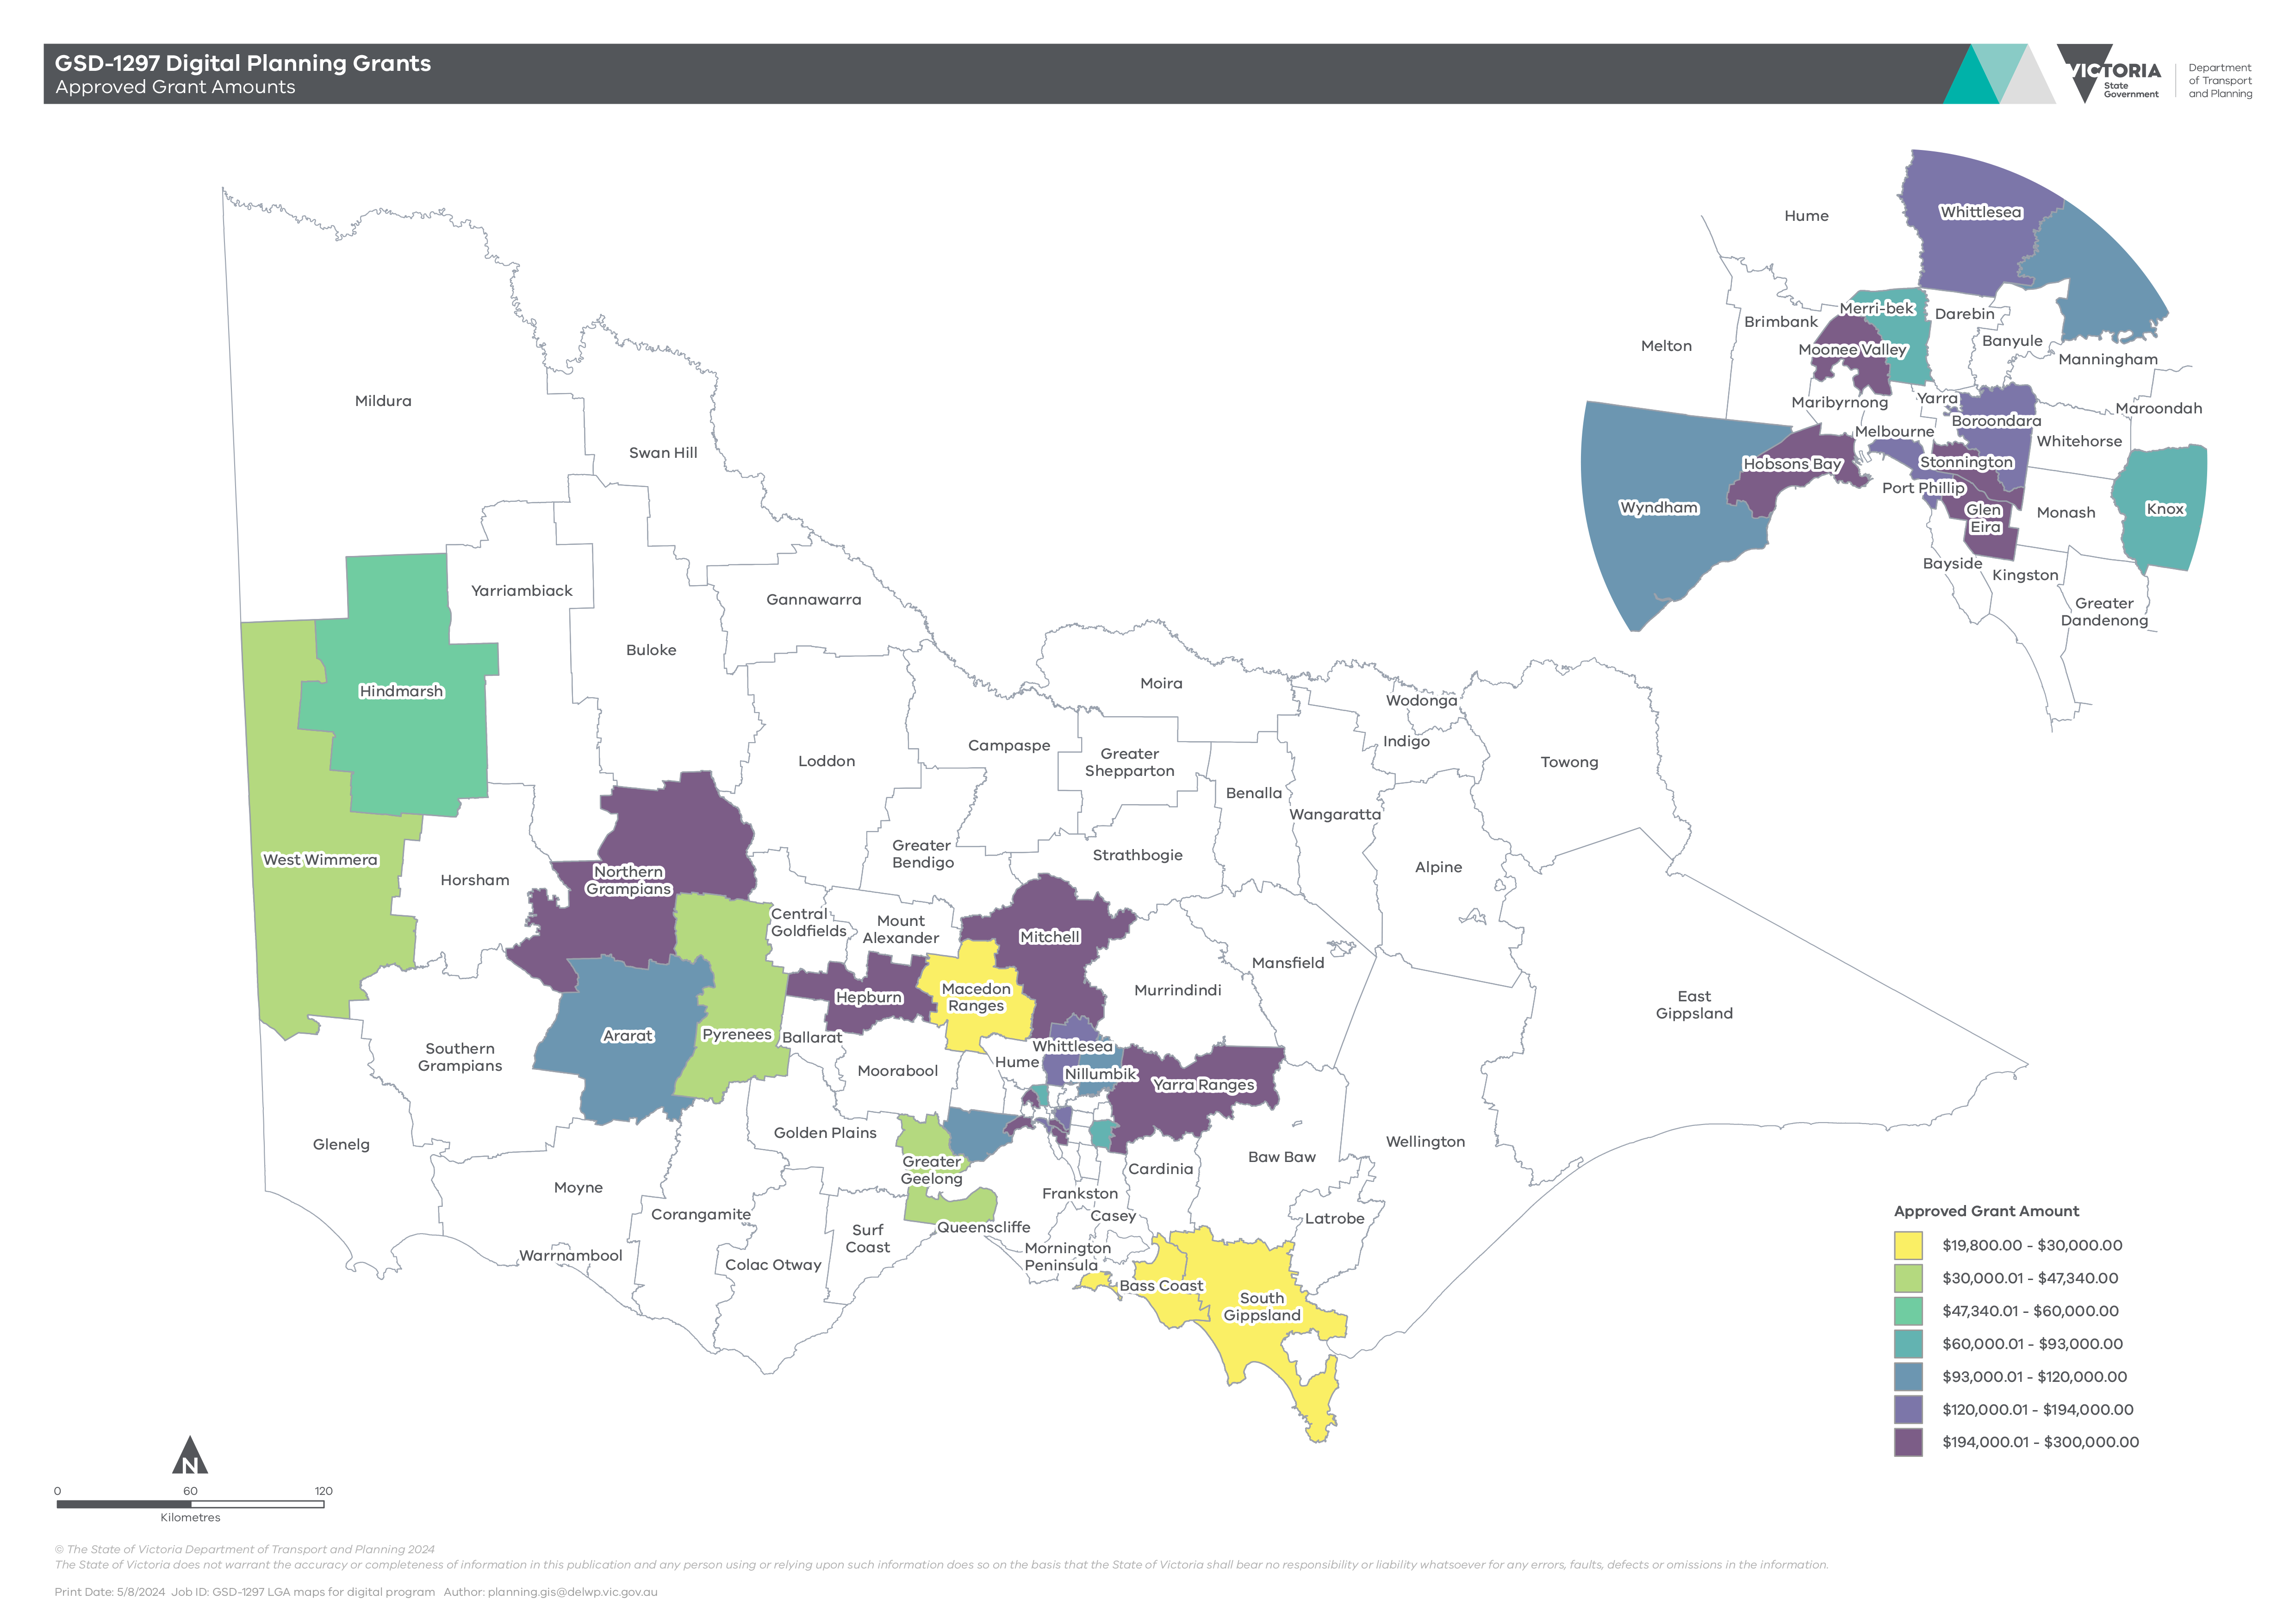 A map of Victoria showing approved digital planning grants for councils